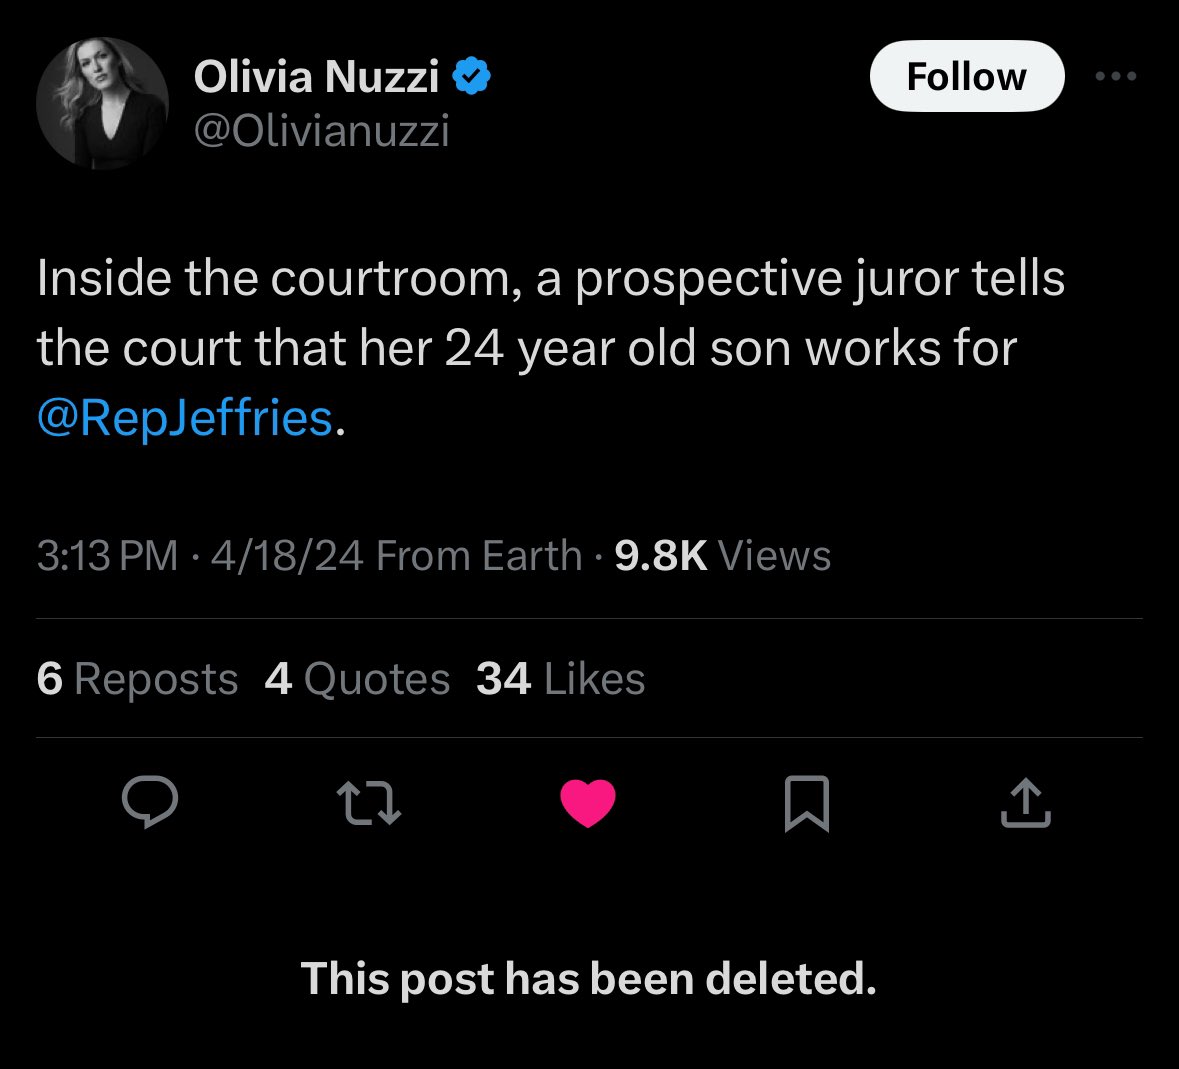 🚨 @NYMag reporter deleted her tweet revealing that a prospective jurors son works for Hakeem Jeffries